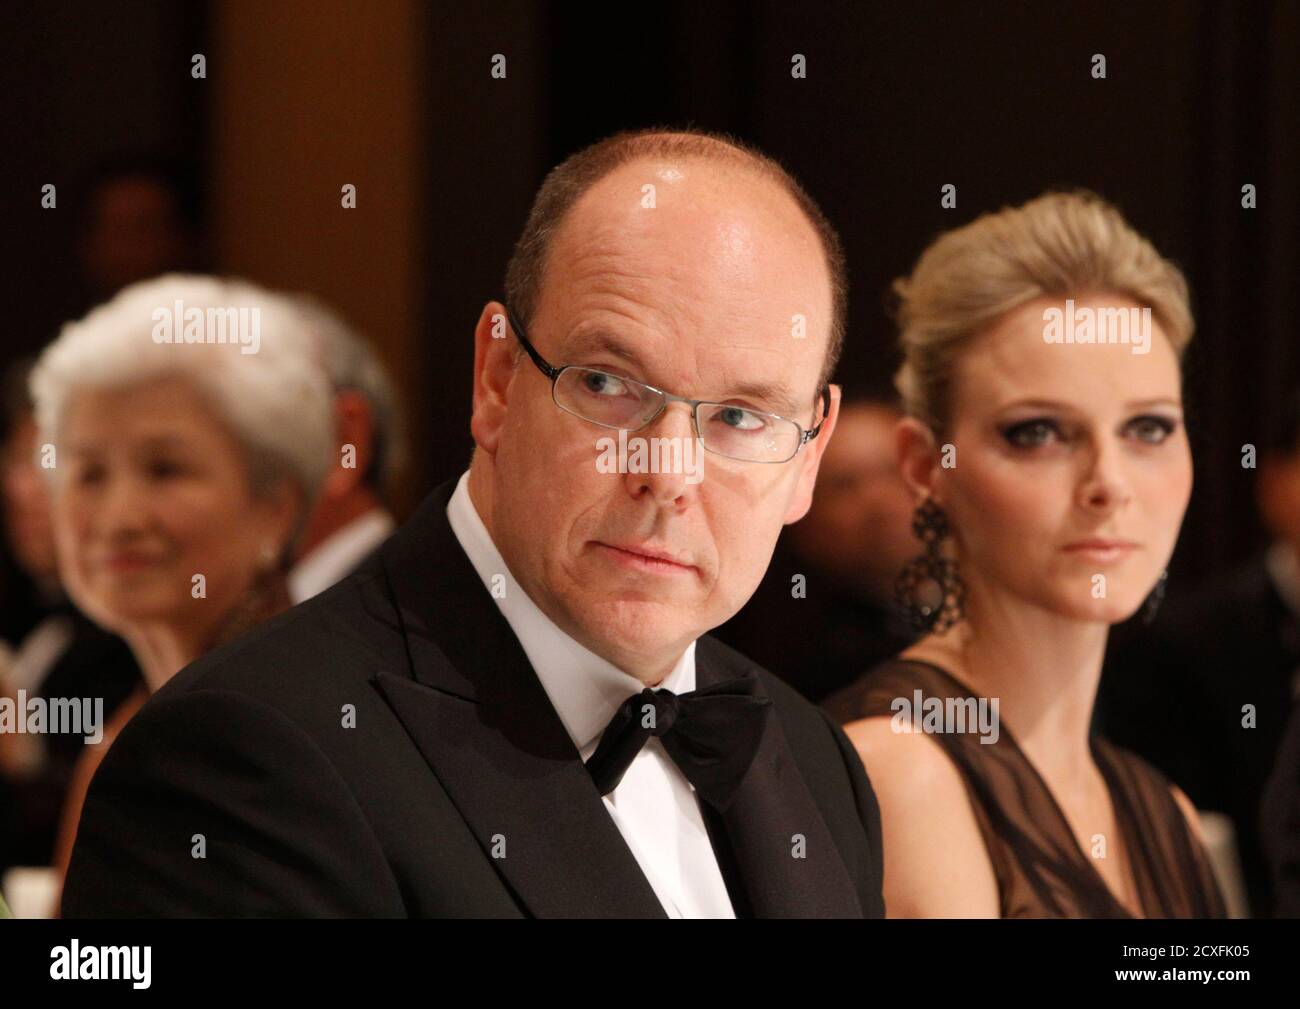 Monaco's Prince Albert II (L) and his fiancee Charlene Wittstock attend at a gala dinner hosted by BirdLife International in Tokyo October 29, 2010. REUTERS/Issei Kato (JAPAN - Tags: ROYALS SOCIETY) Stock Photo